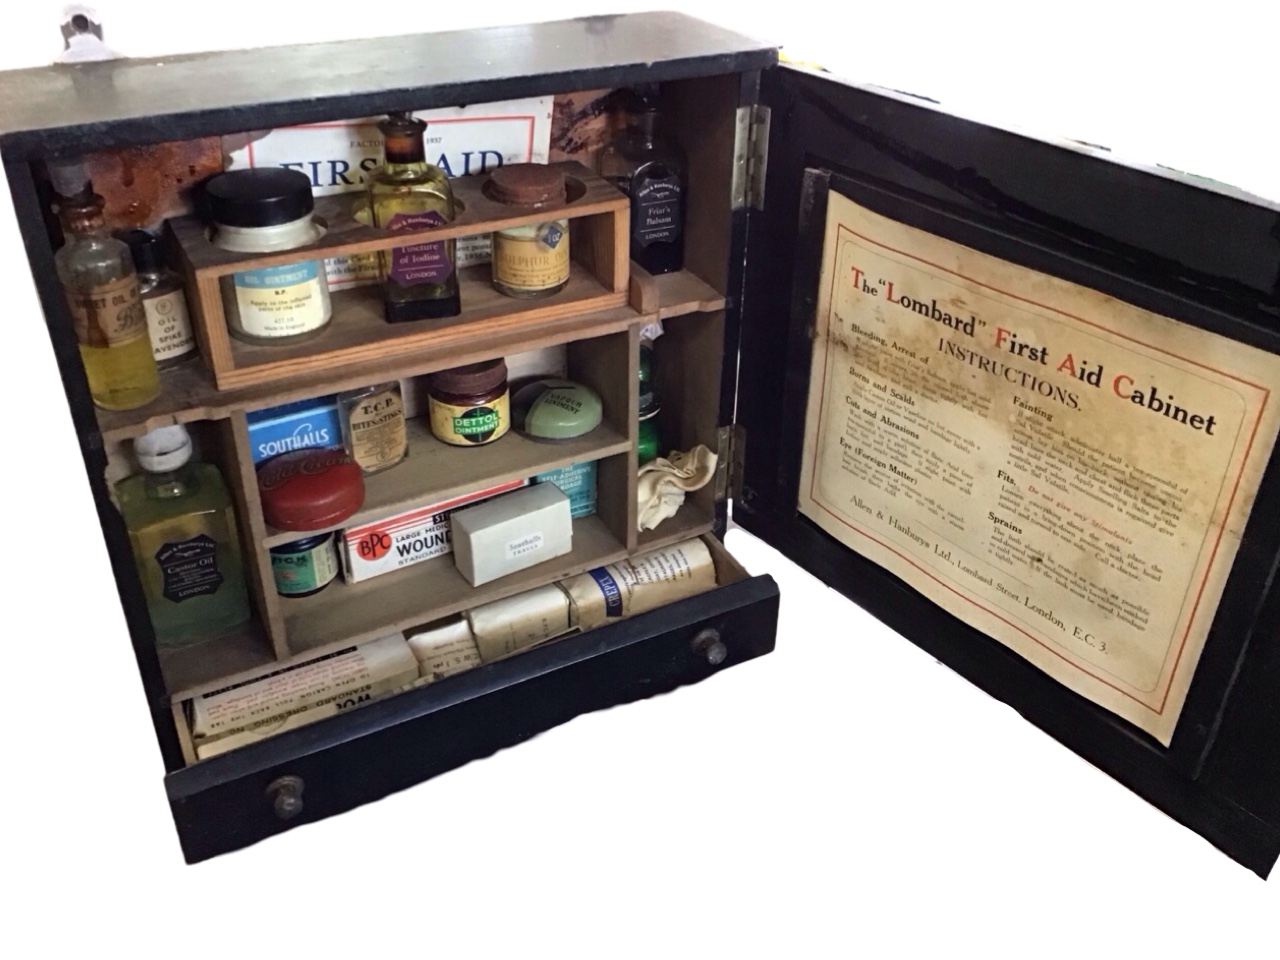 An Edwardian hanging ebonised first aid cabinet - The Lombard, with brass knobbed panelled door - Image 2 of 3